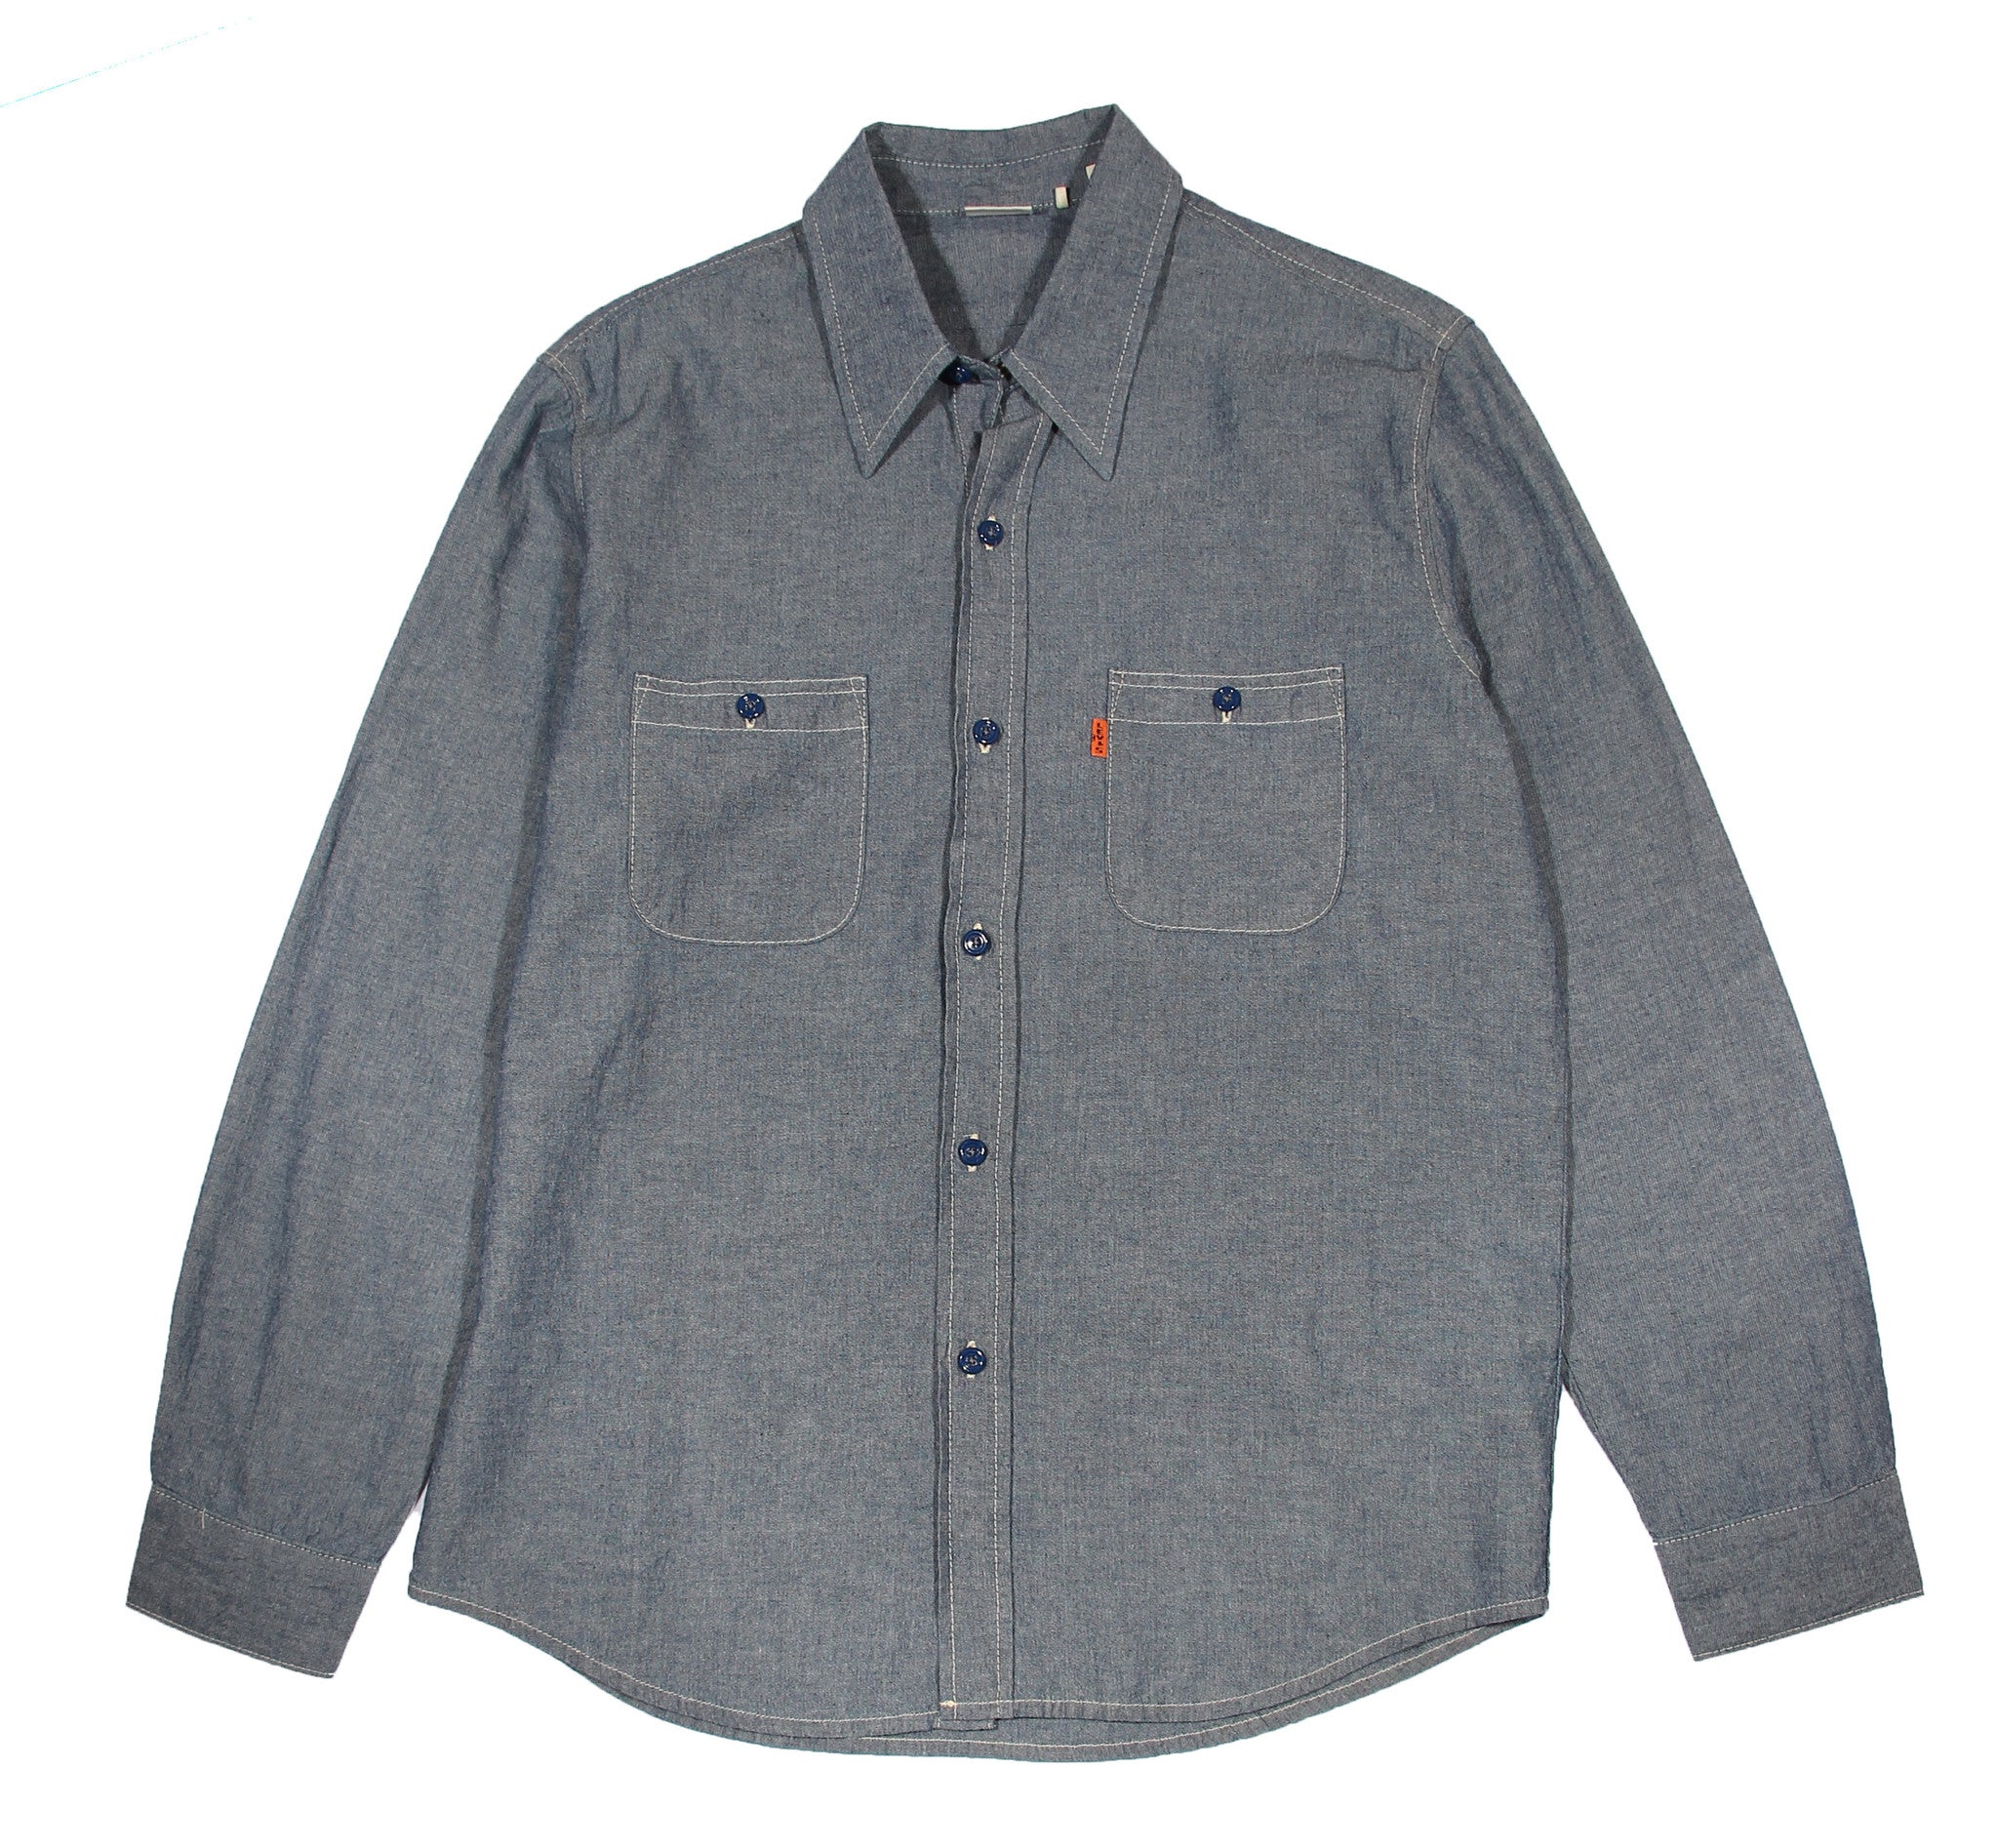 LEVIS'S VINTAGE 1960s CHAMBRAY SHIRT - COSMOTOG